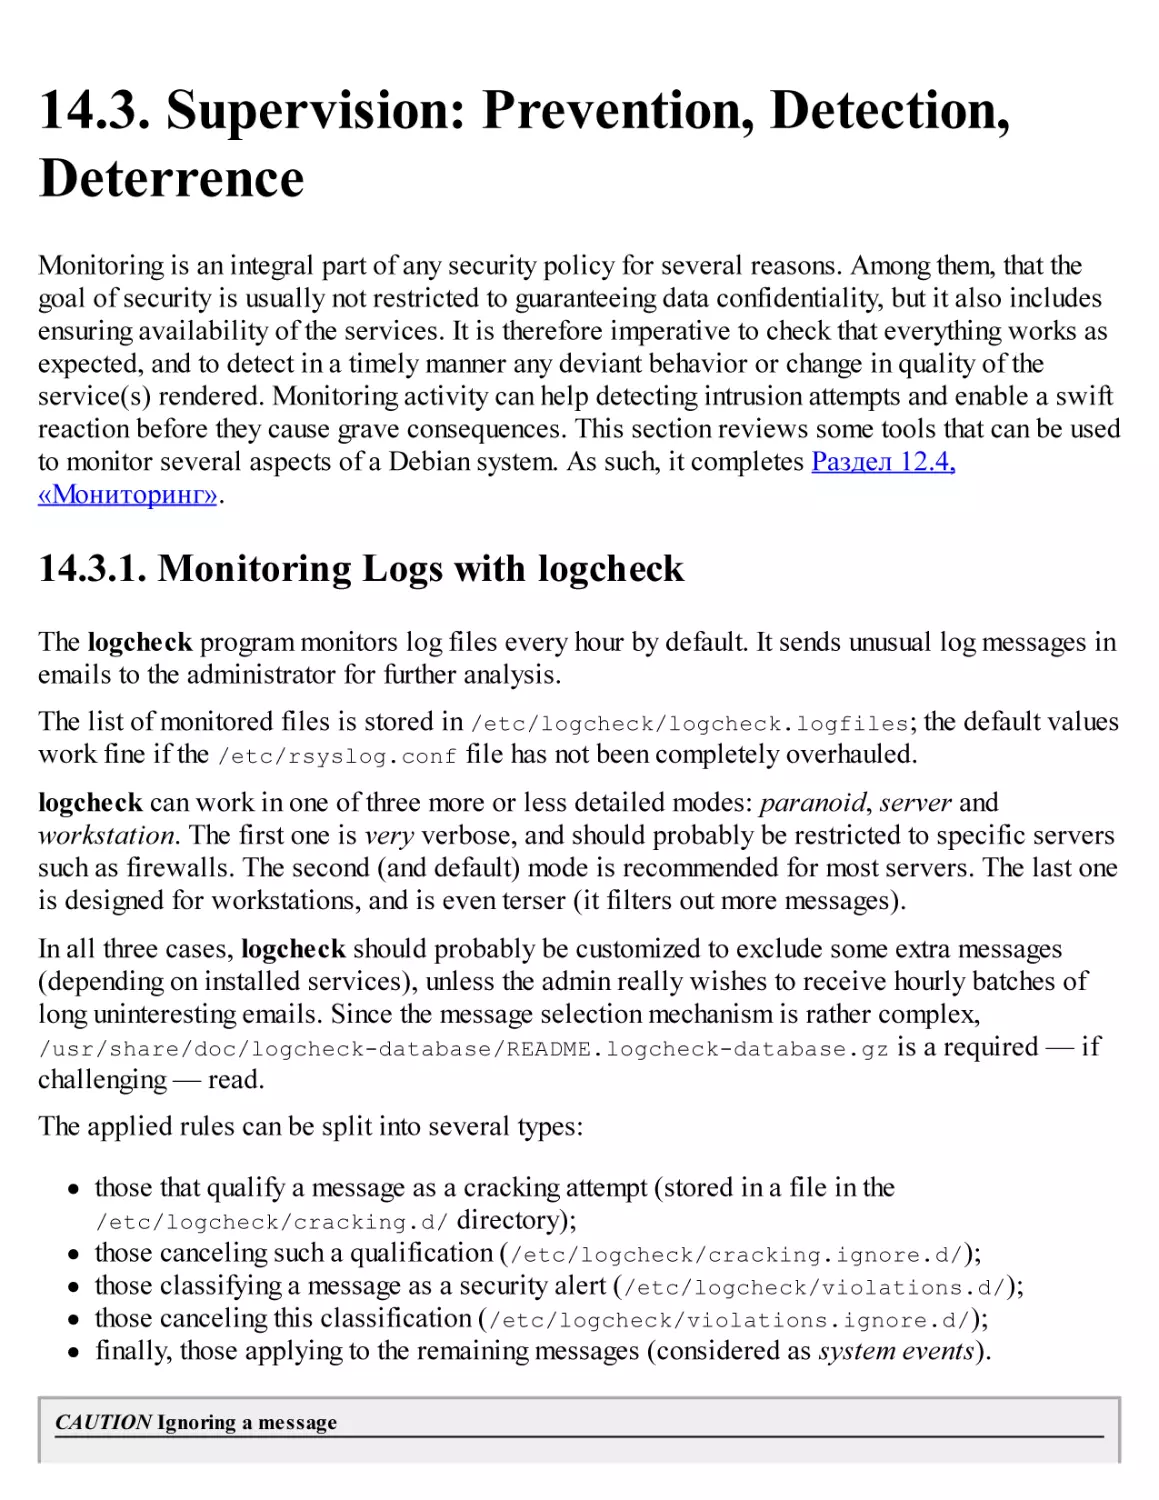 14.3. Supervision
14.3.1. Monitoring Logs with logcheck